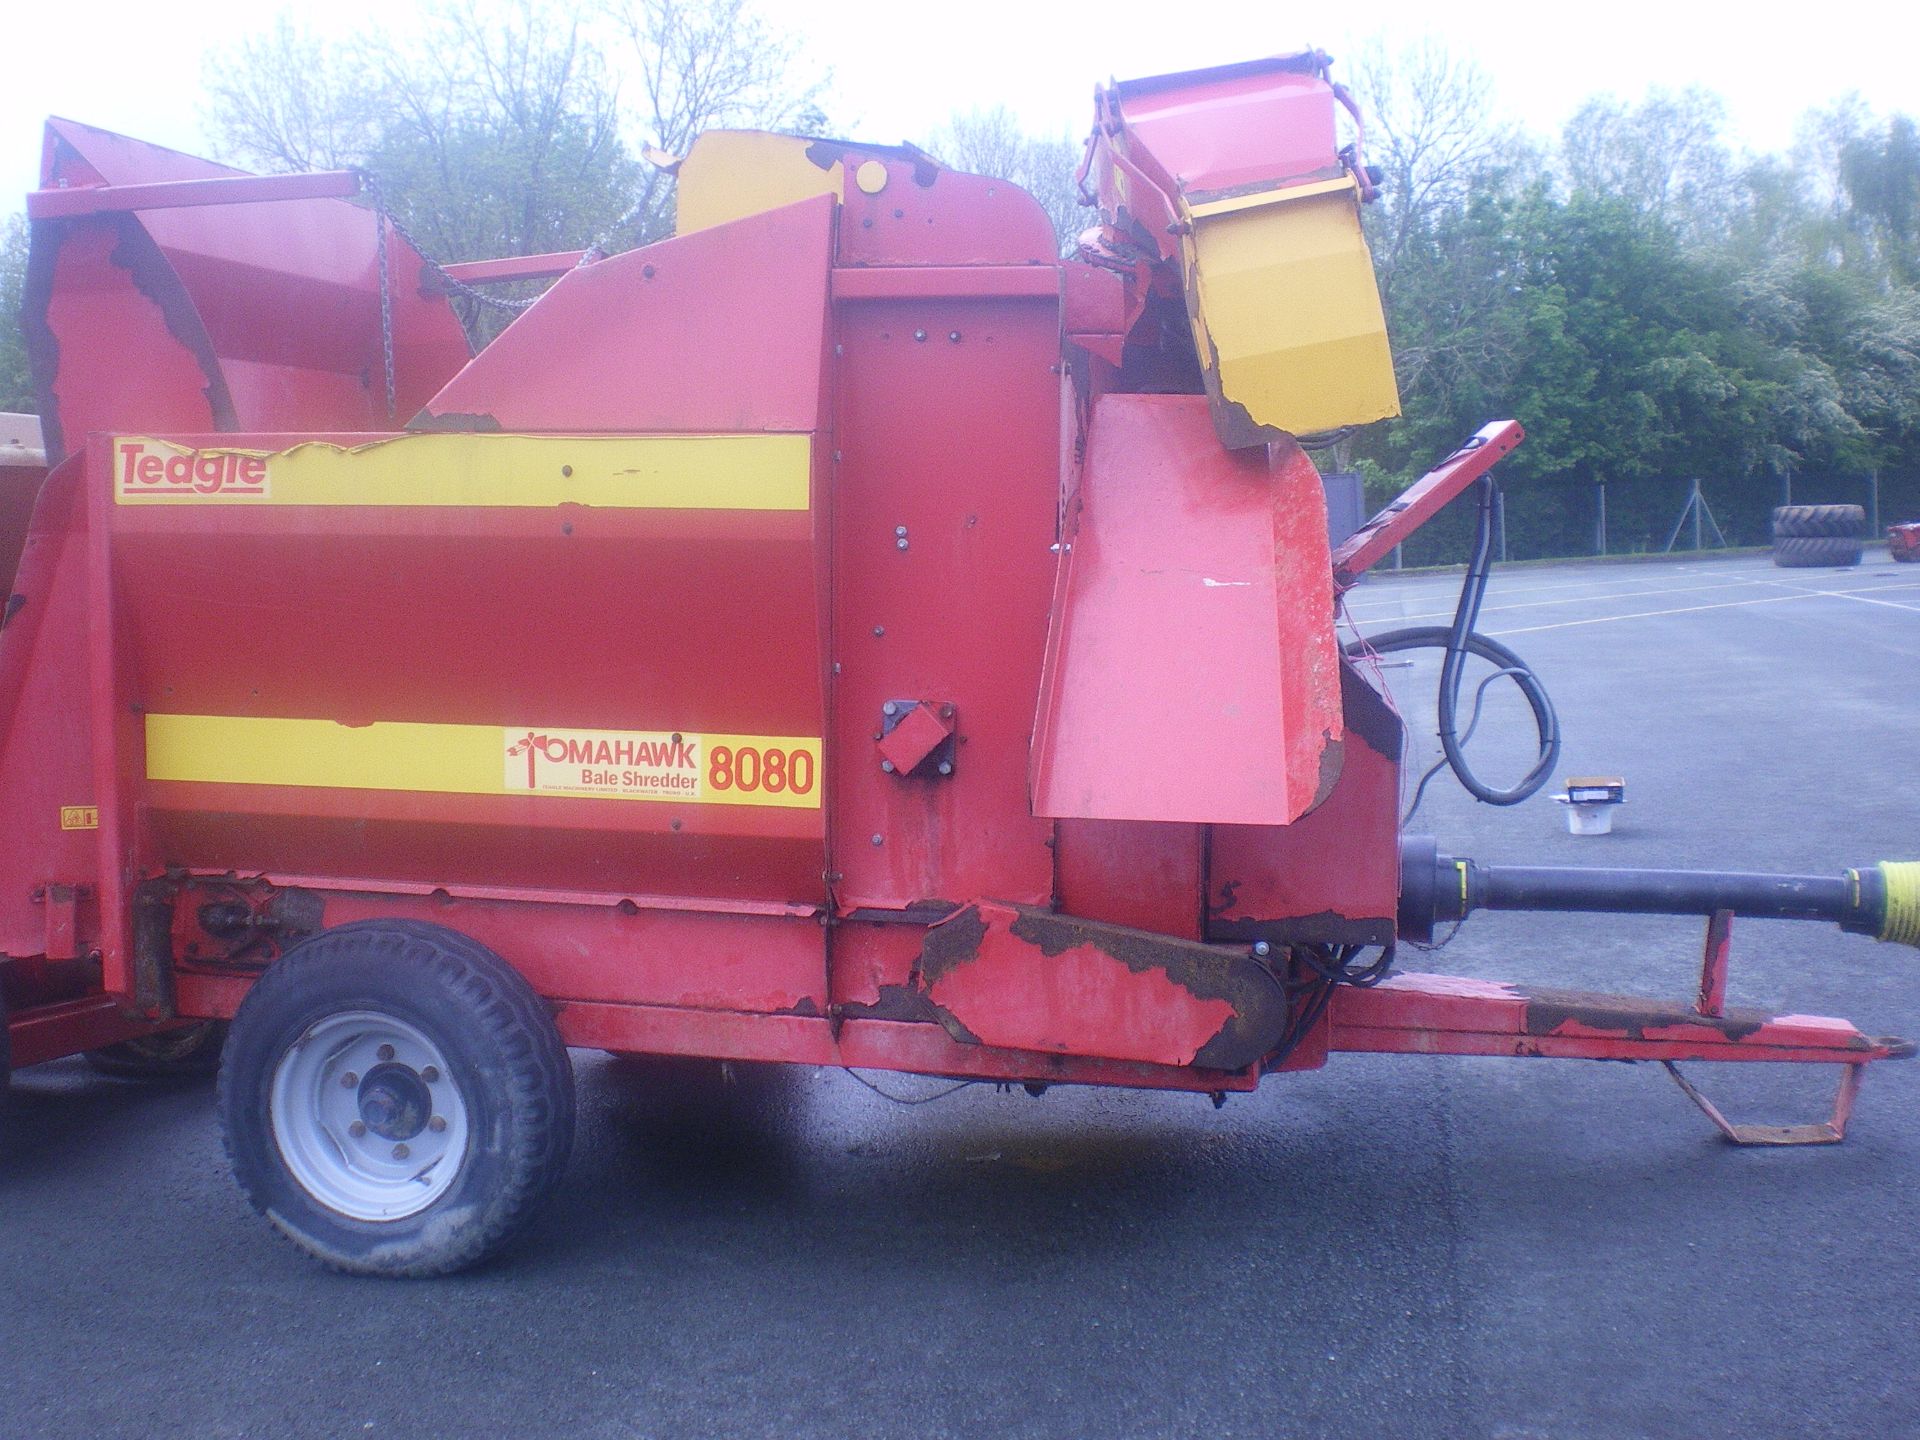 TEAGLE 80/80 TAILED STRAW/SILAGE CHOPPER - Image 2 of 4